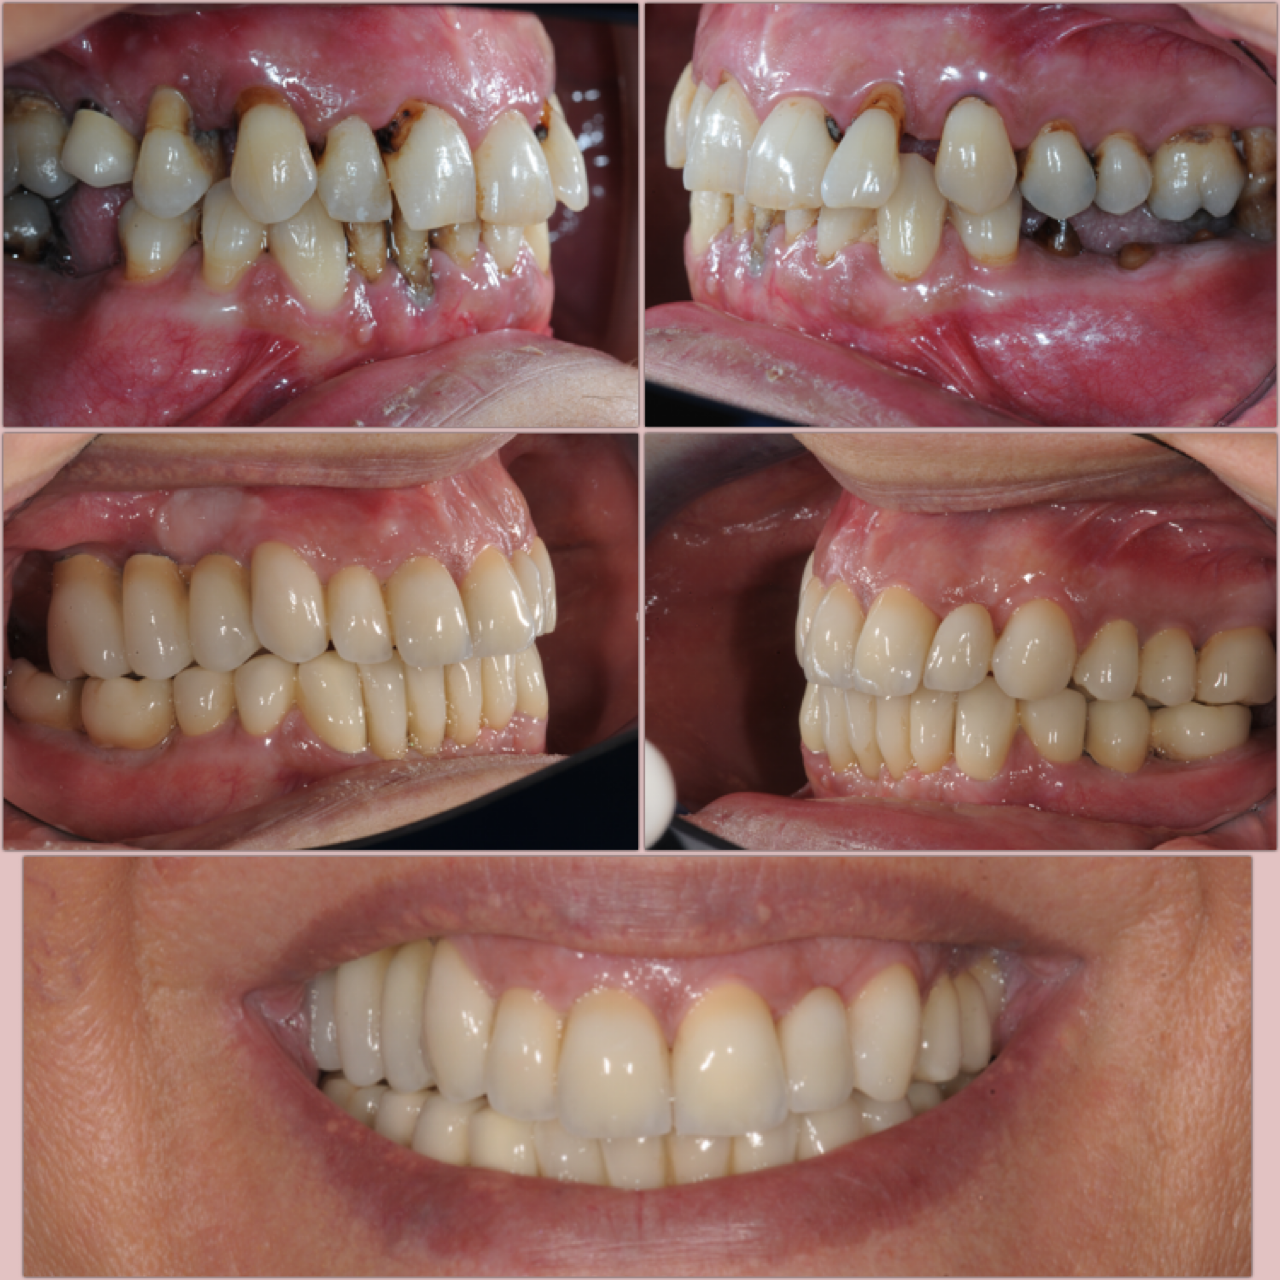 Surgical intervention on teeth